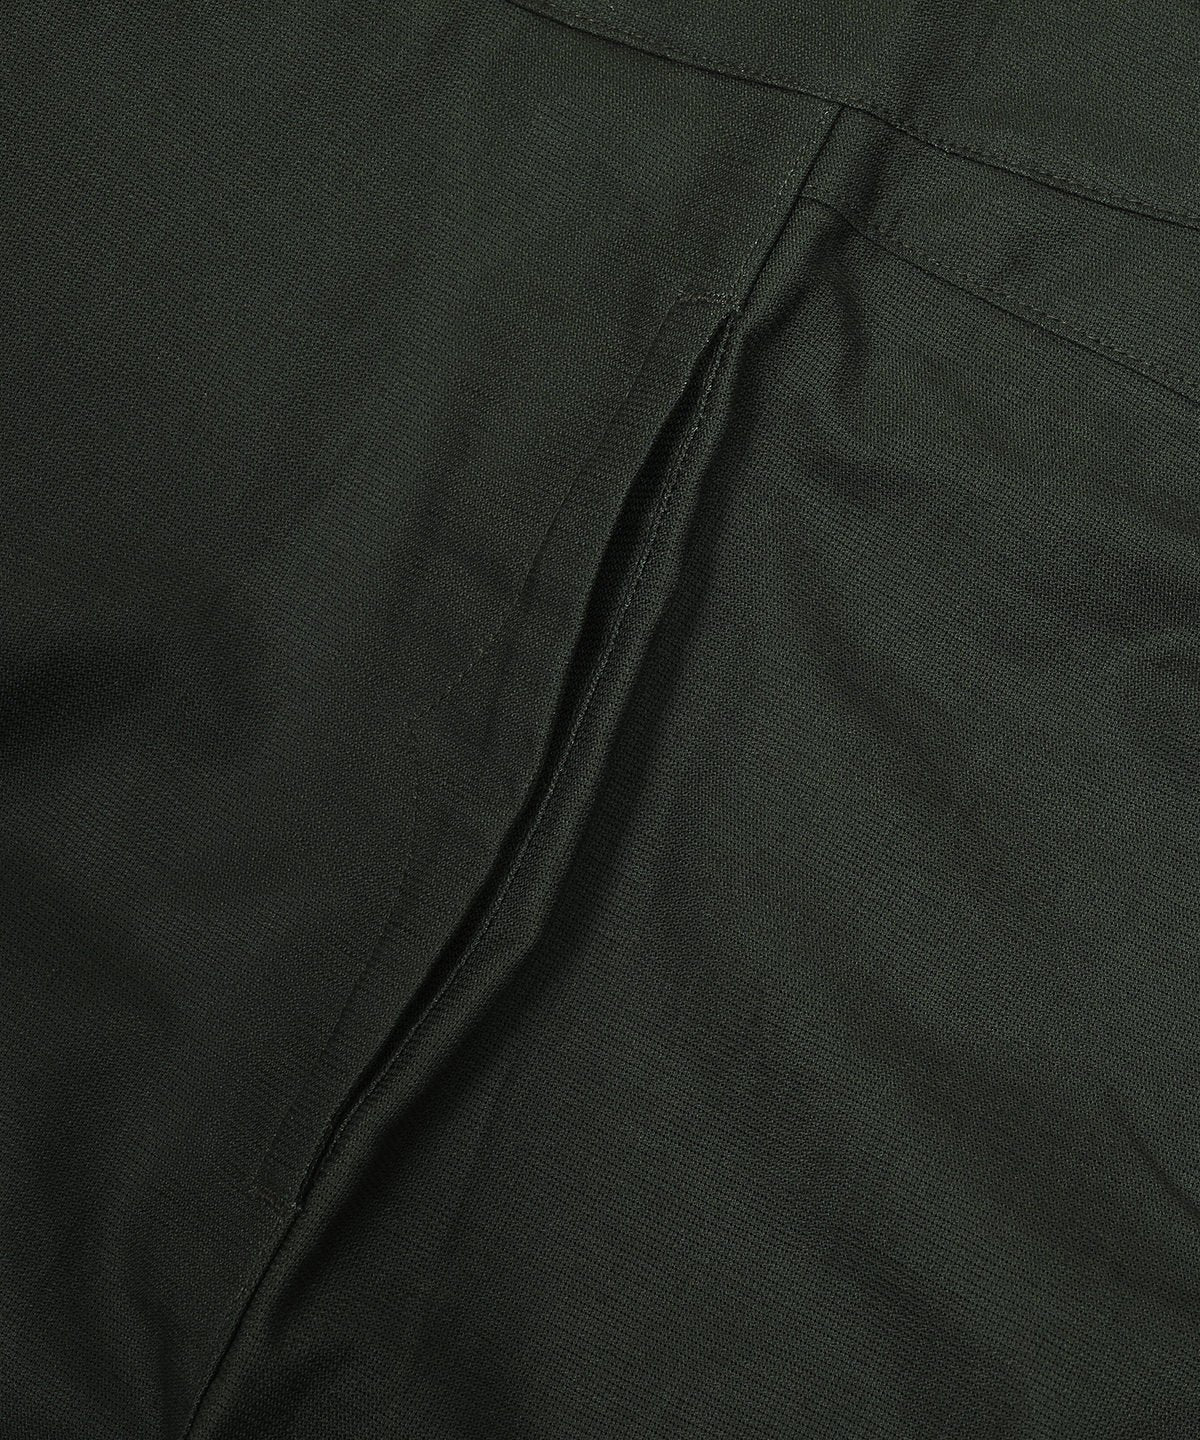 PANAMA CLOTH FRENCH TROUSER